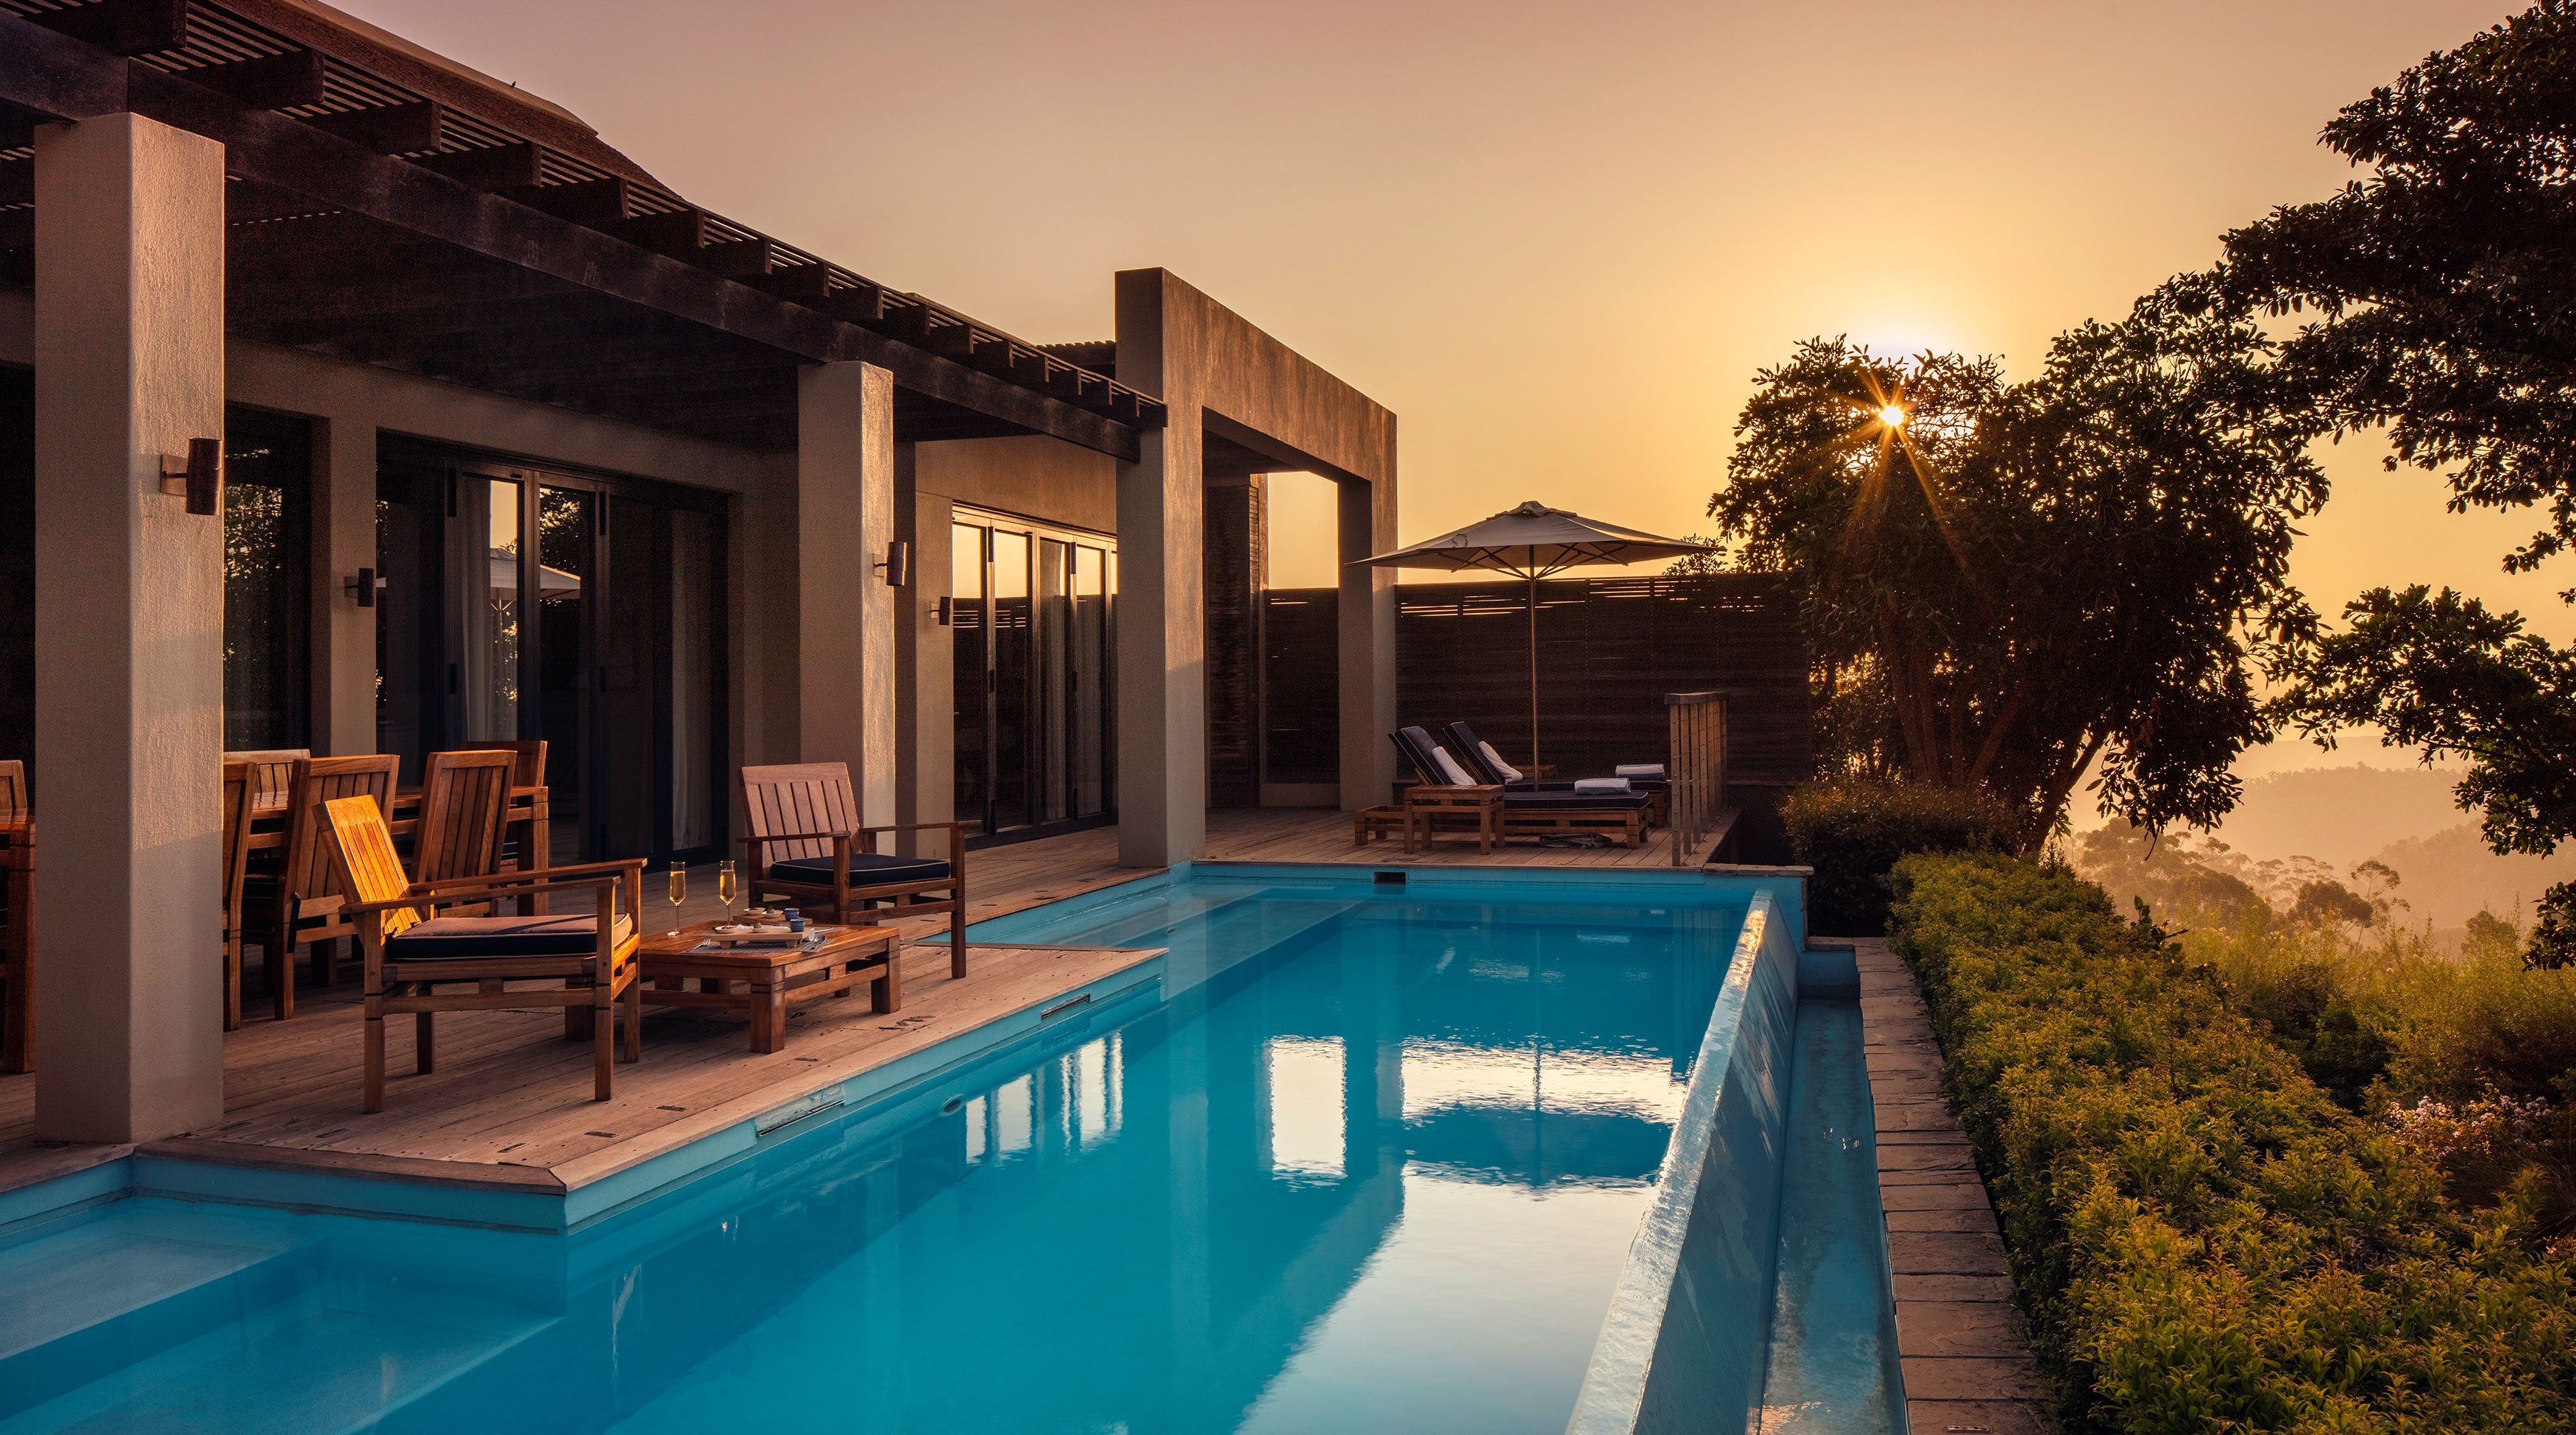 Presidential-Lodge-2-Pool-and-Terrace-at-Dusk-3500x1950_1624278572116